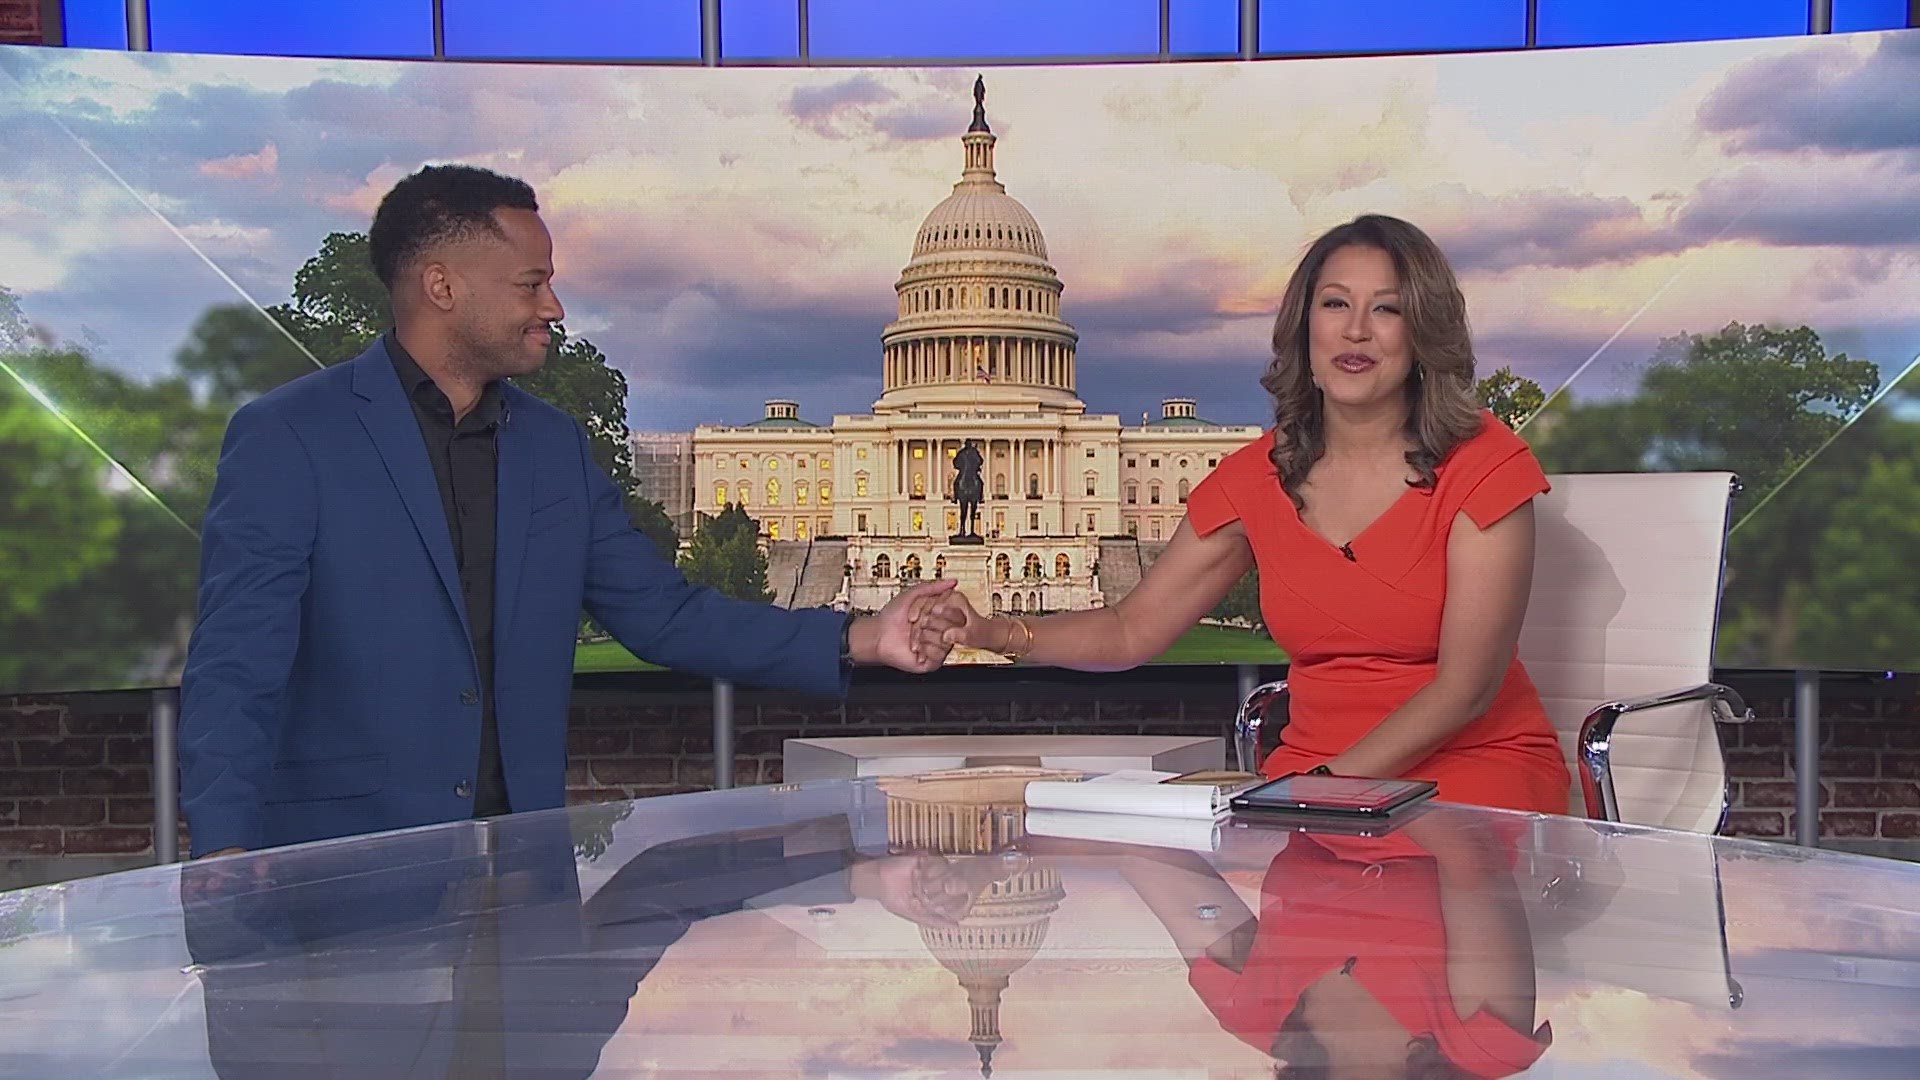 Today is John's last day after 7-years here at WUSA9. We couldn't let you go without a special send-off